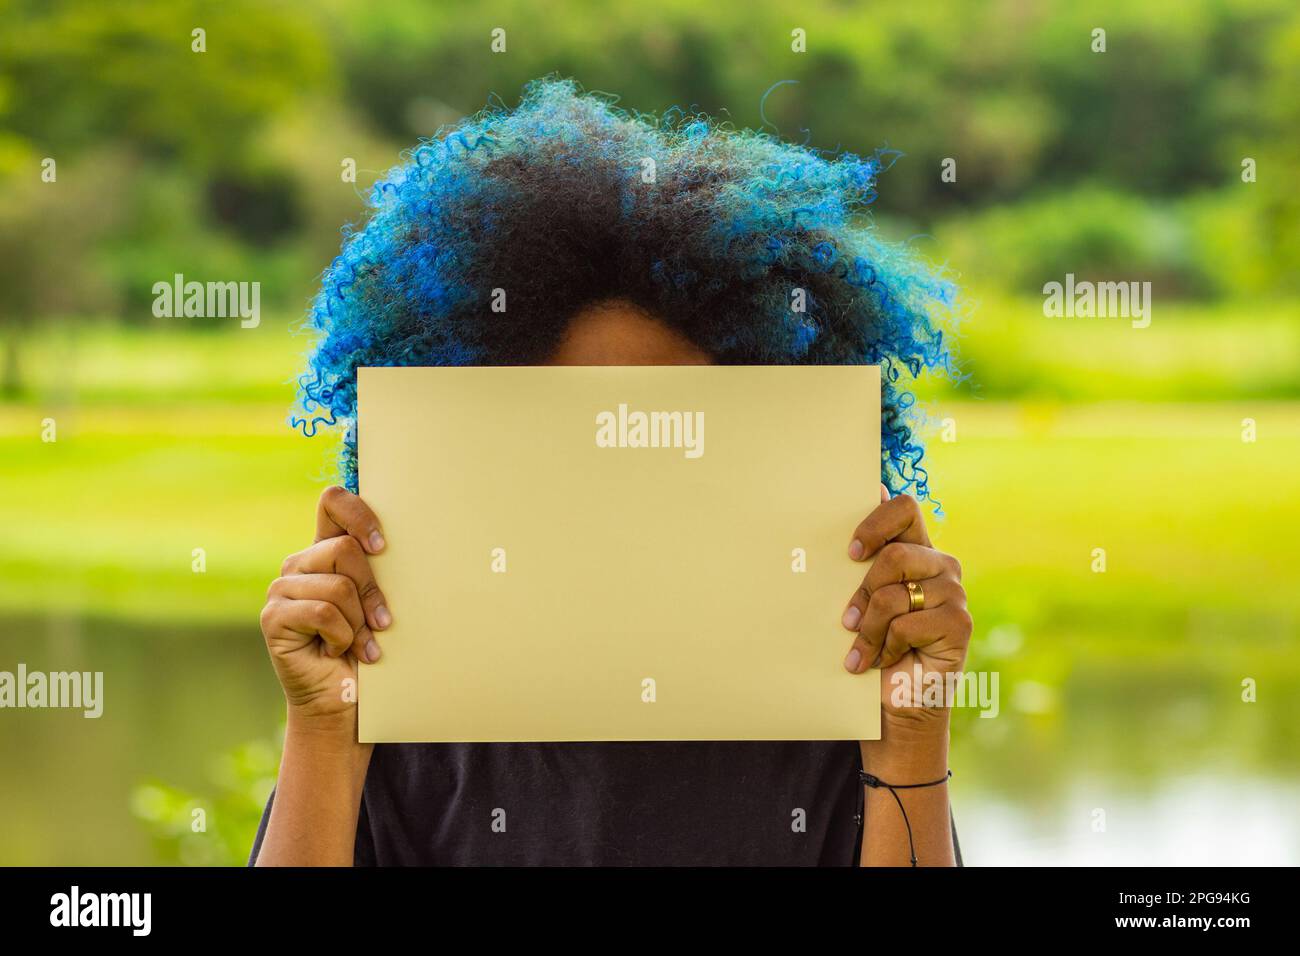 Goiania, Goias, Brazil – March 21, 2023: A young woman, with hair dyed blue, her face hidden behind a blank poster, with a landscape in the background Stock Photo